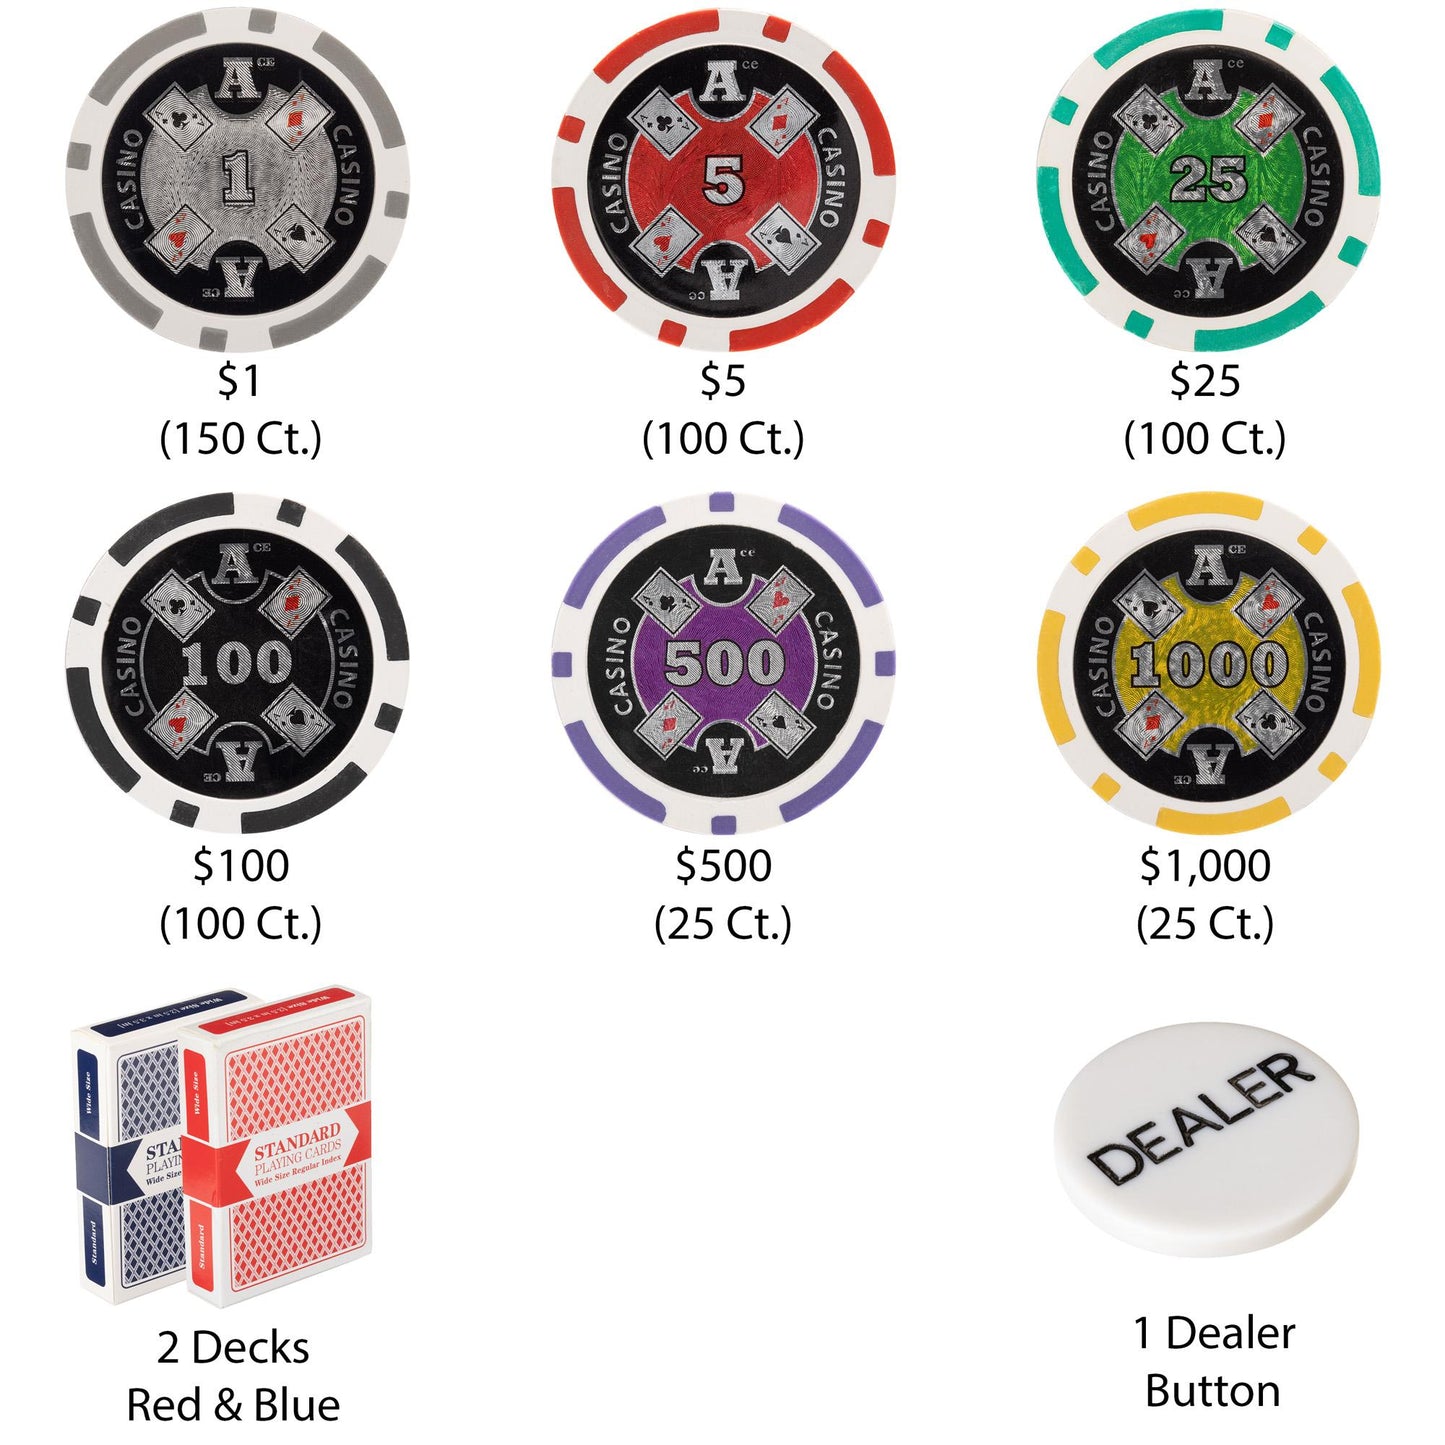 500 Ace Casino Poker Chips with Hi Gloss Case